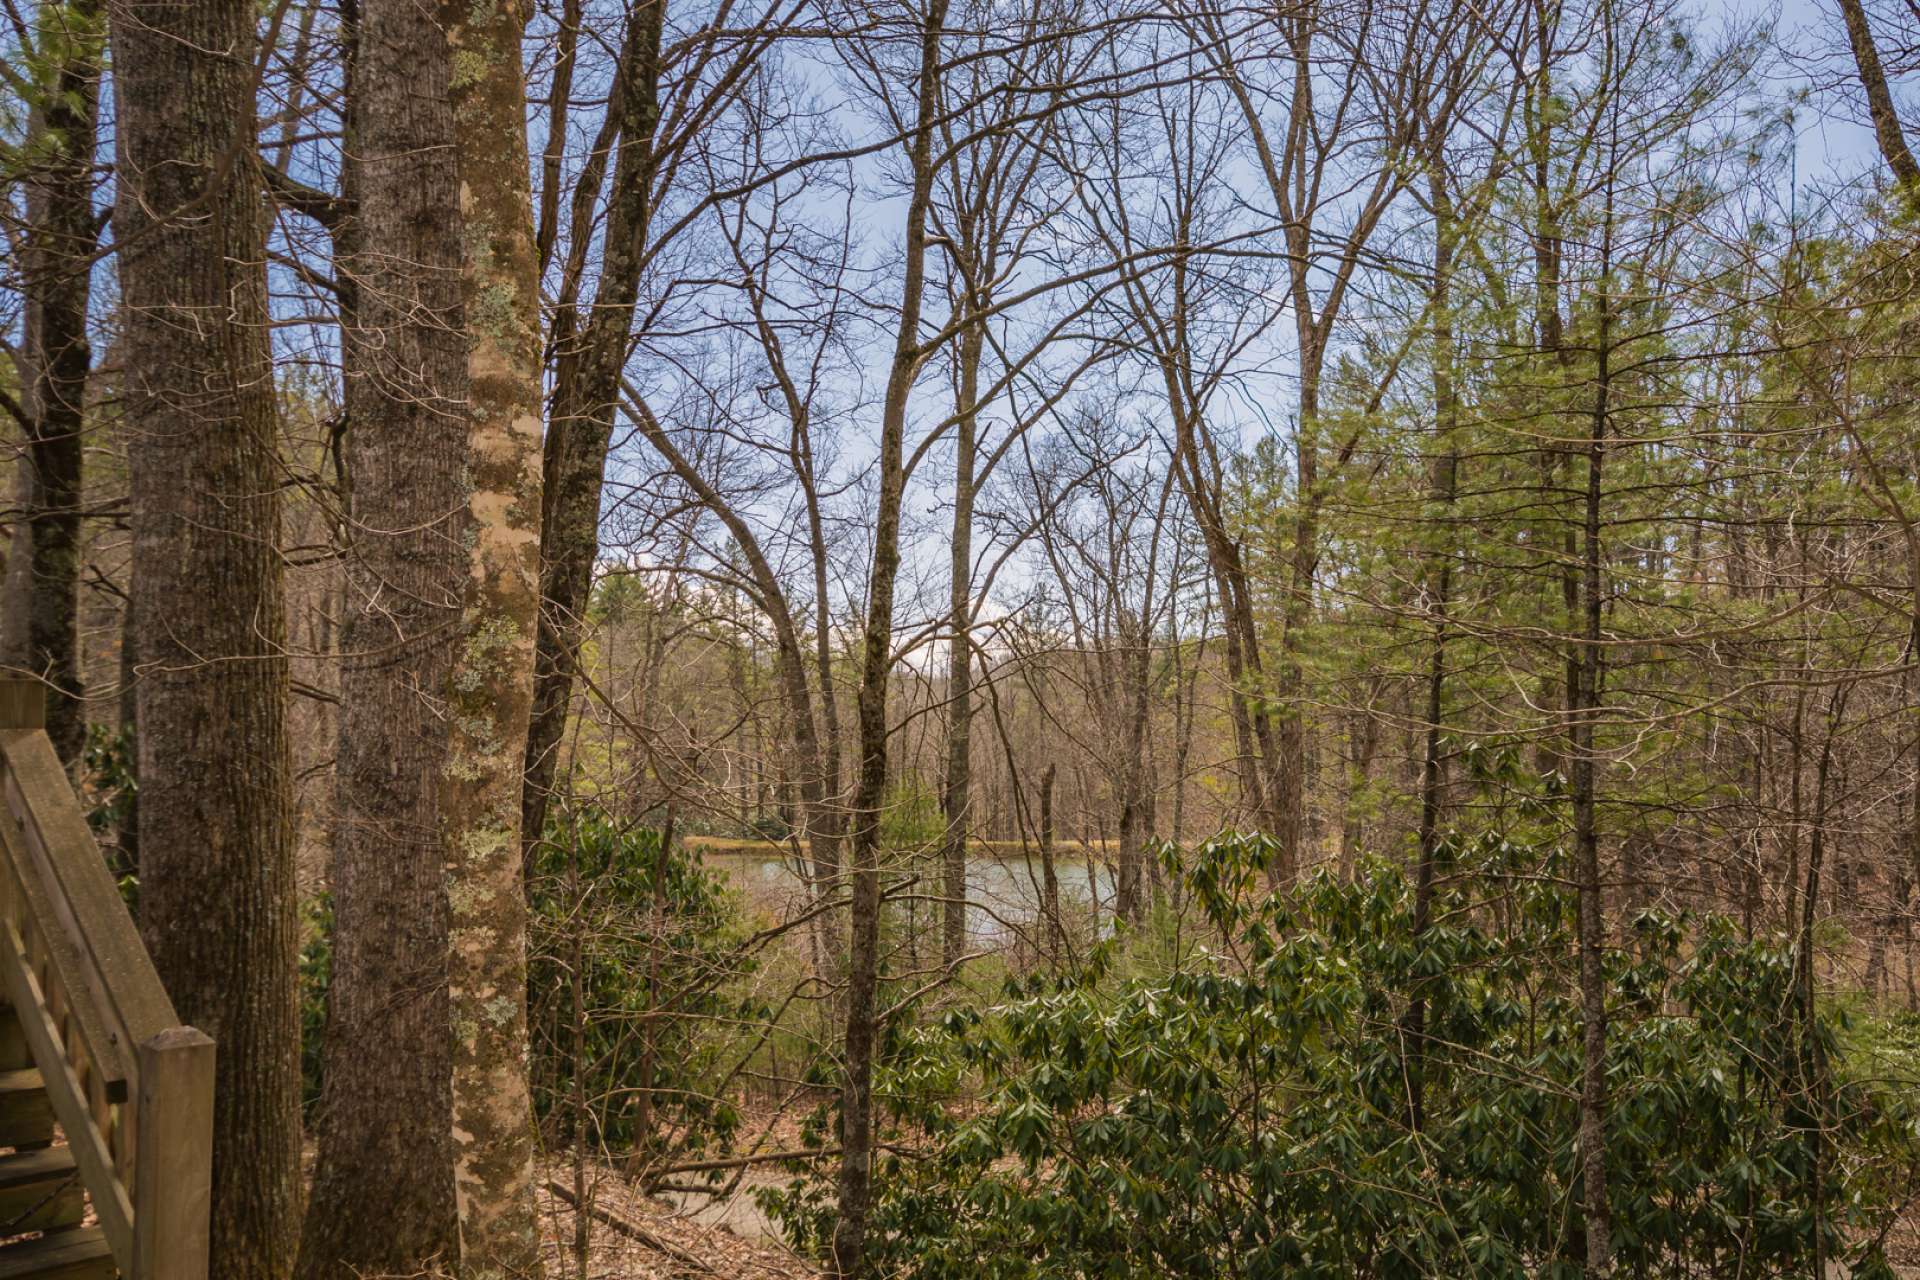 Nestled in a wooded setting and surrounded by native mountain foliage, you can relax on the open back deck and enjoy  scenery which includes a small mountain pond.